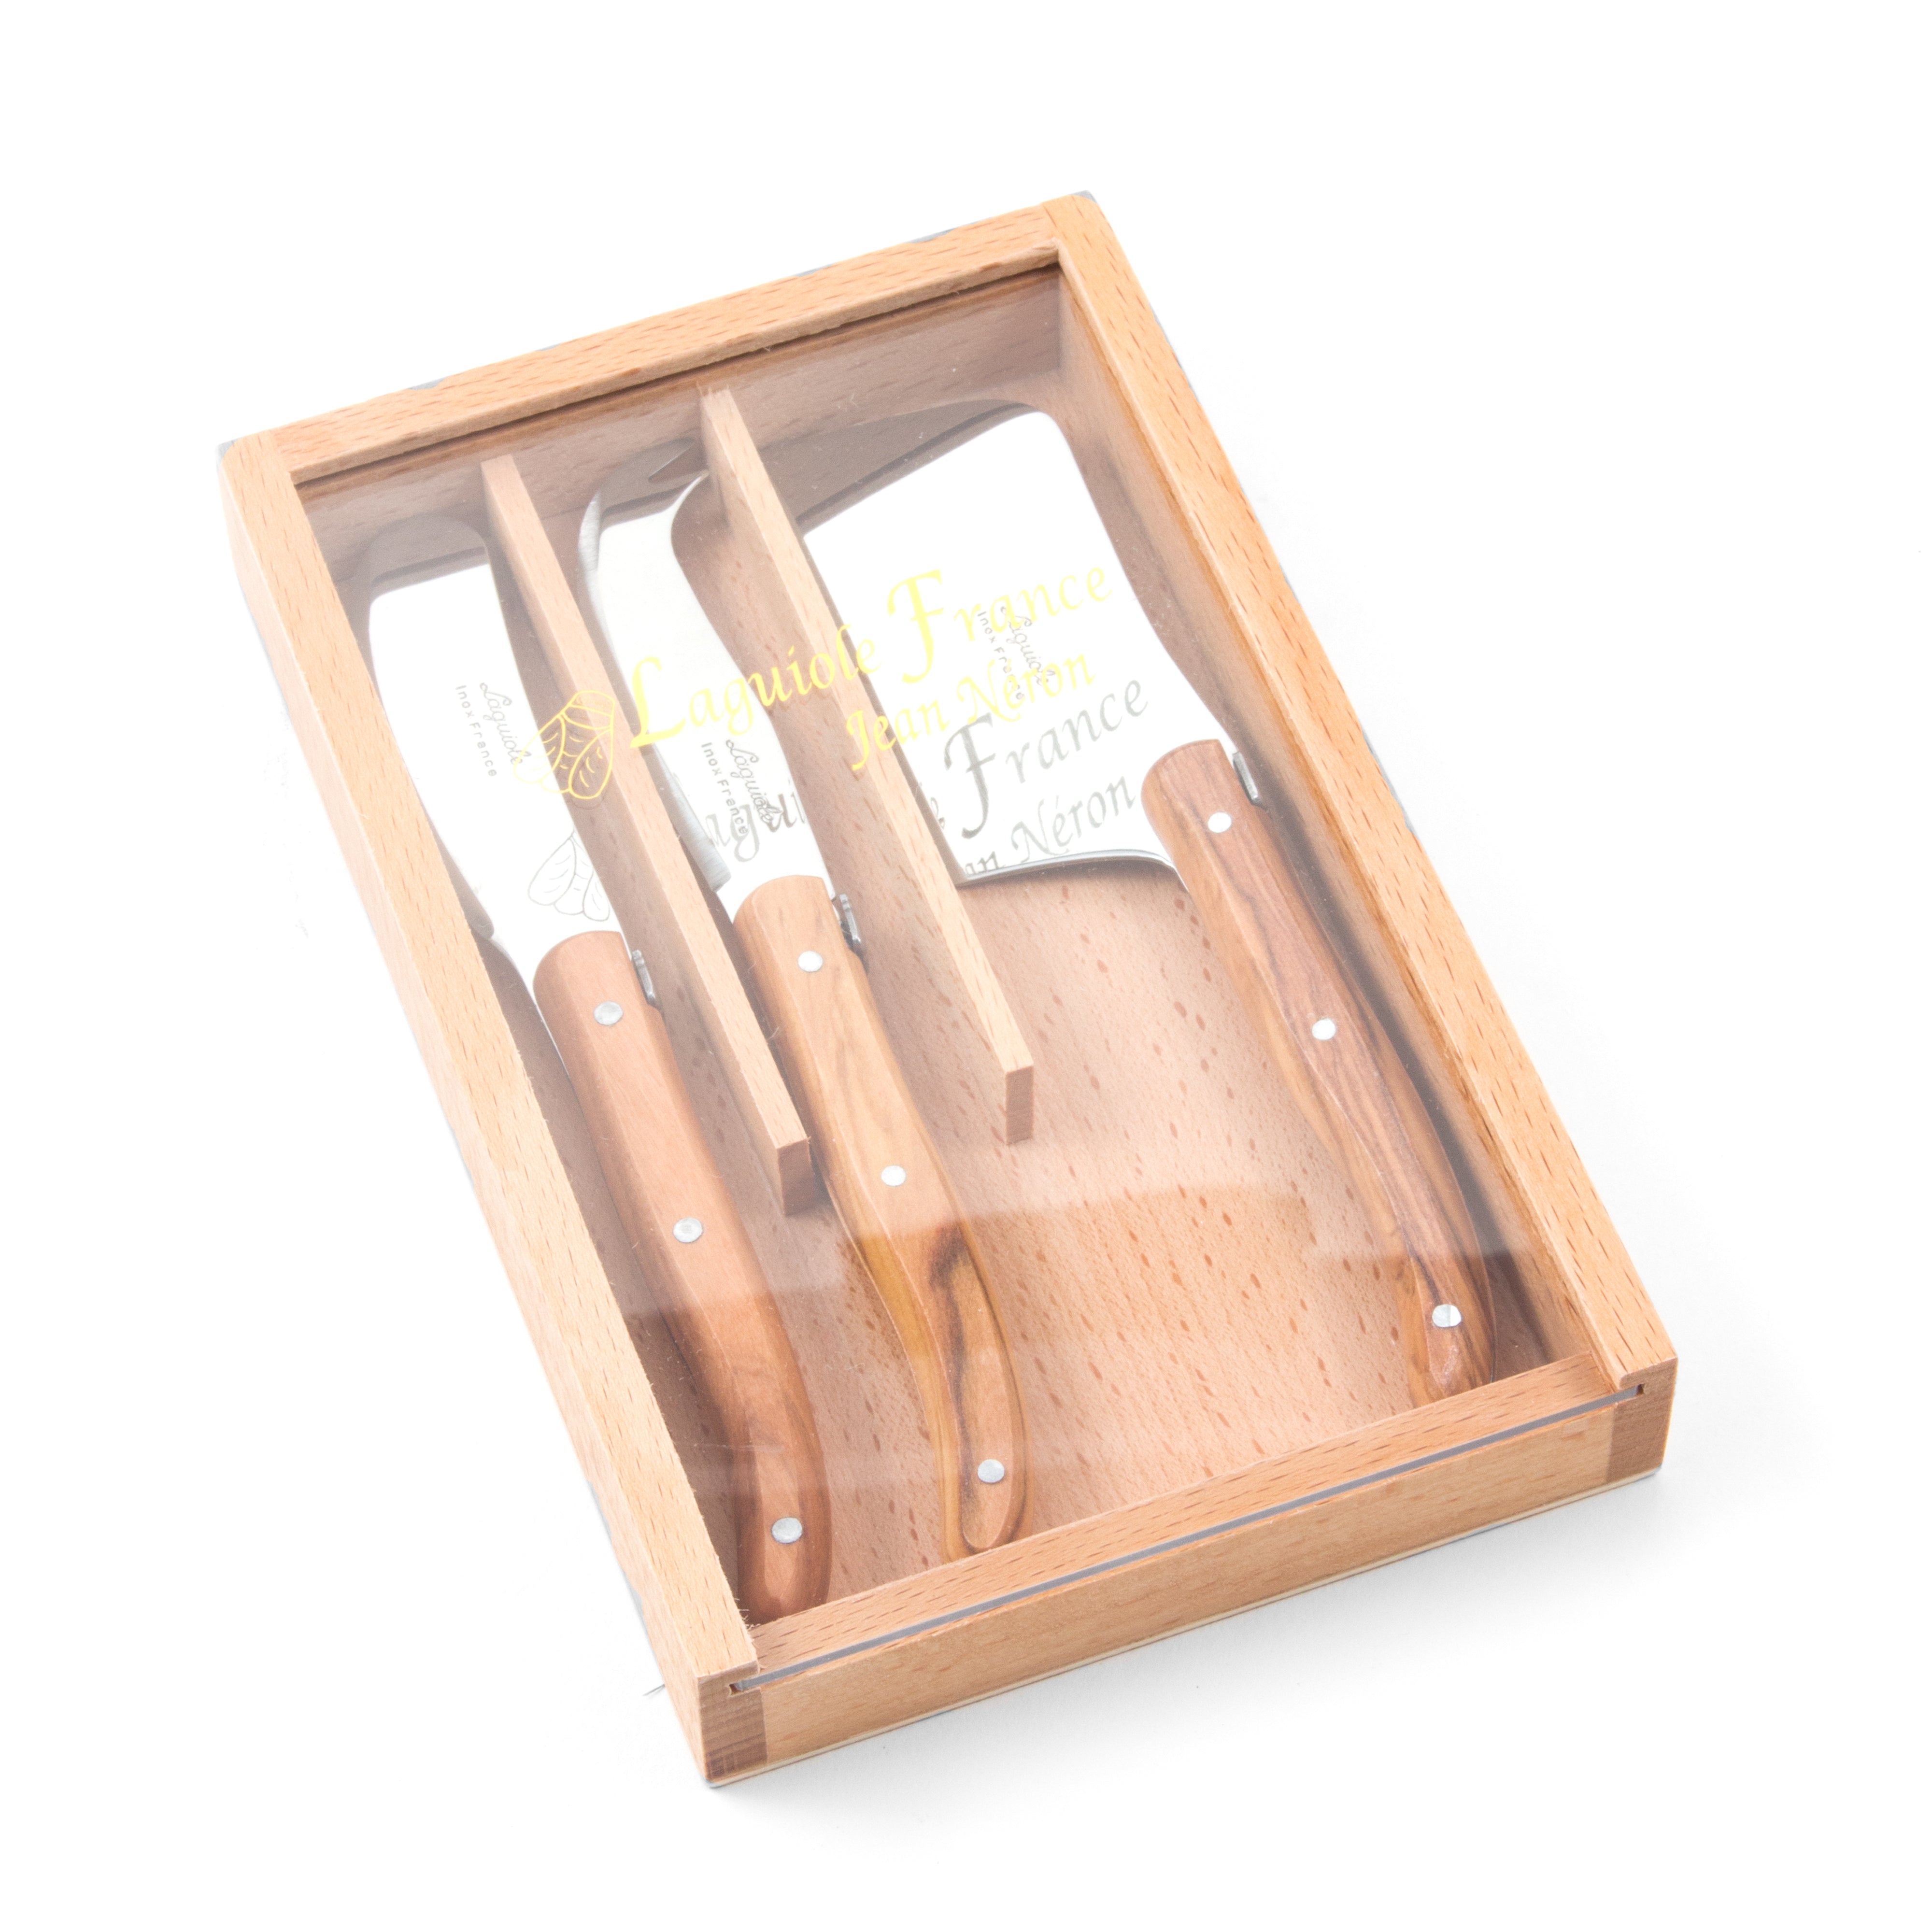 Laguiole Mini Olivewood Cheese Set in Wooden Box with Acrylic Lid (Set of 3) Cutlery Set Laguiole Brand_Laguiole Cheese Sets Gift Sets Kitchen_Dinnerware Kitchen_Kitchenware Laguiole Loose Mini Rainbow Utensils Mini Cheese Sets Laguiole_Cheese_Knives_S_3_-_Olivewood_in_box